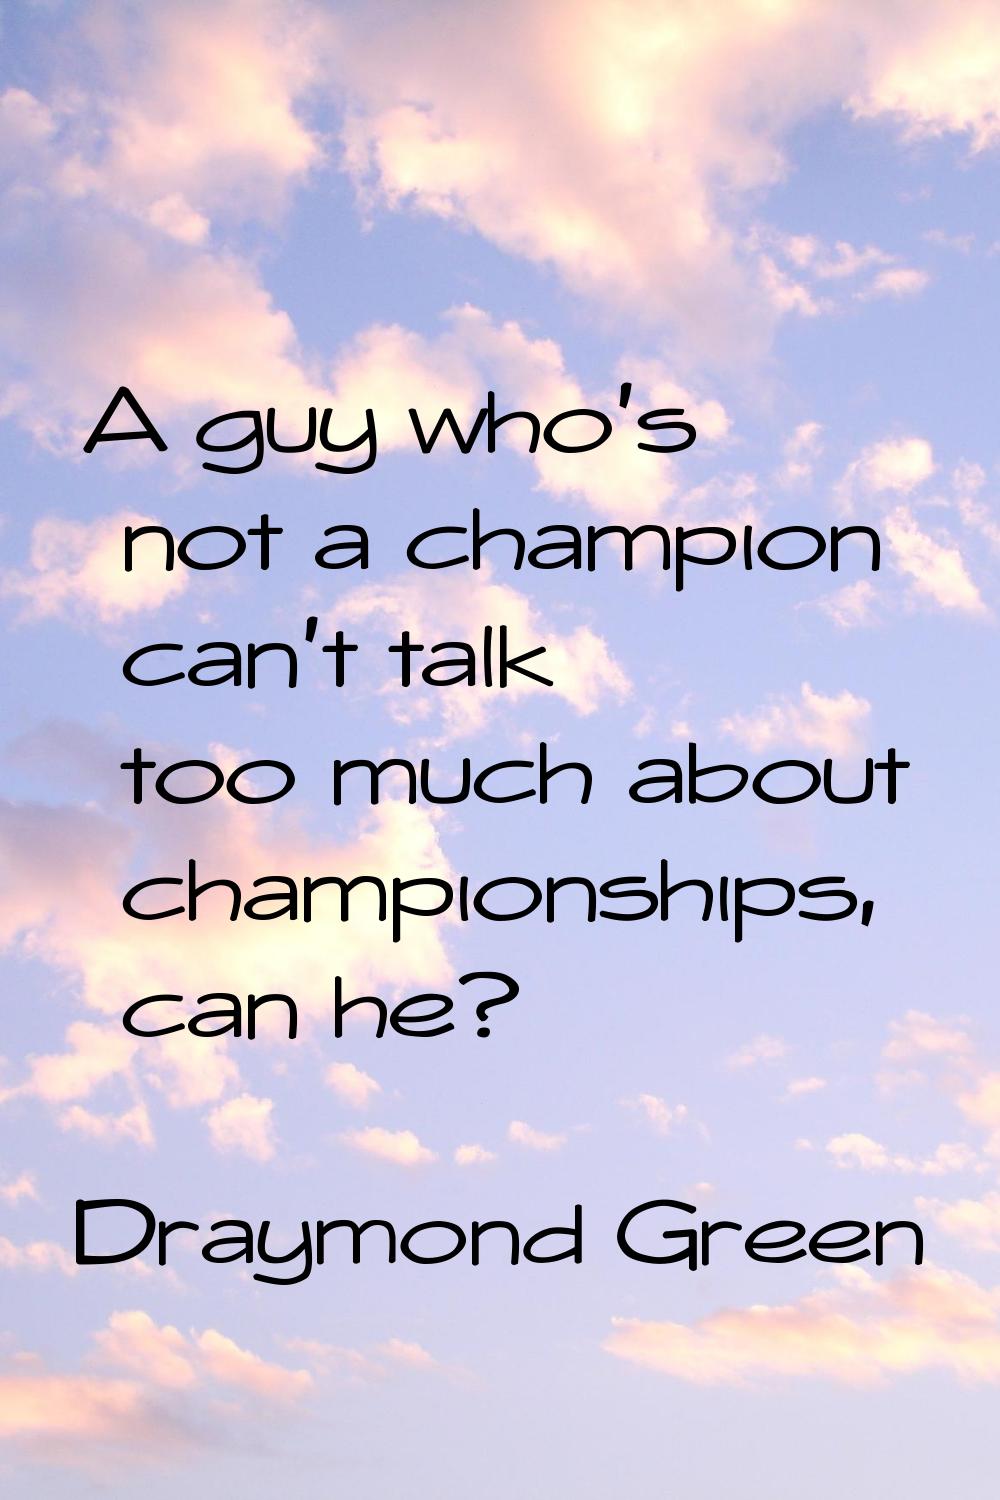 A guy who's not a champion can't talk too much about championships, can he?